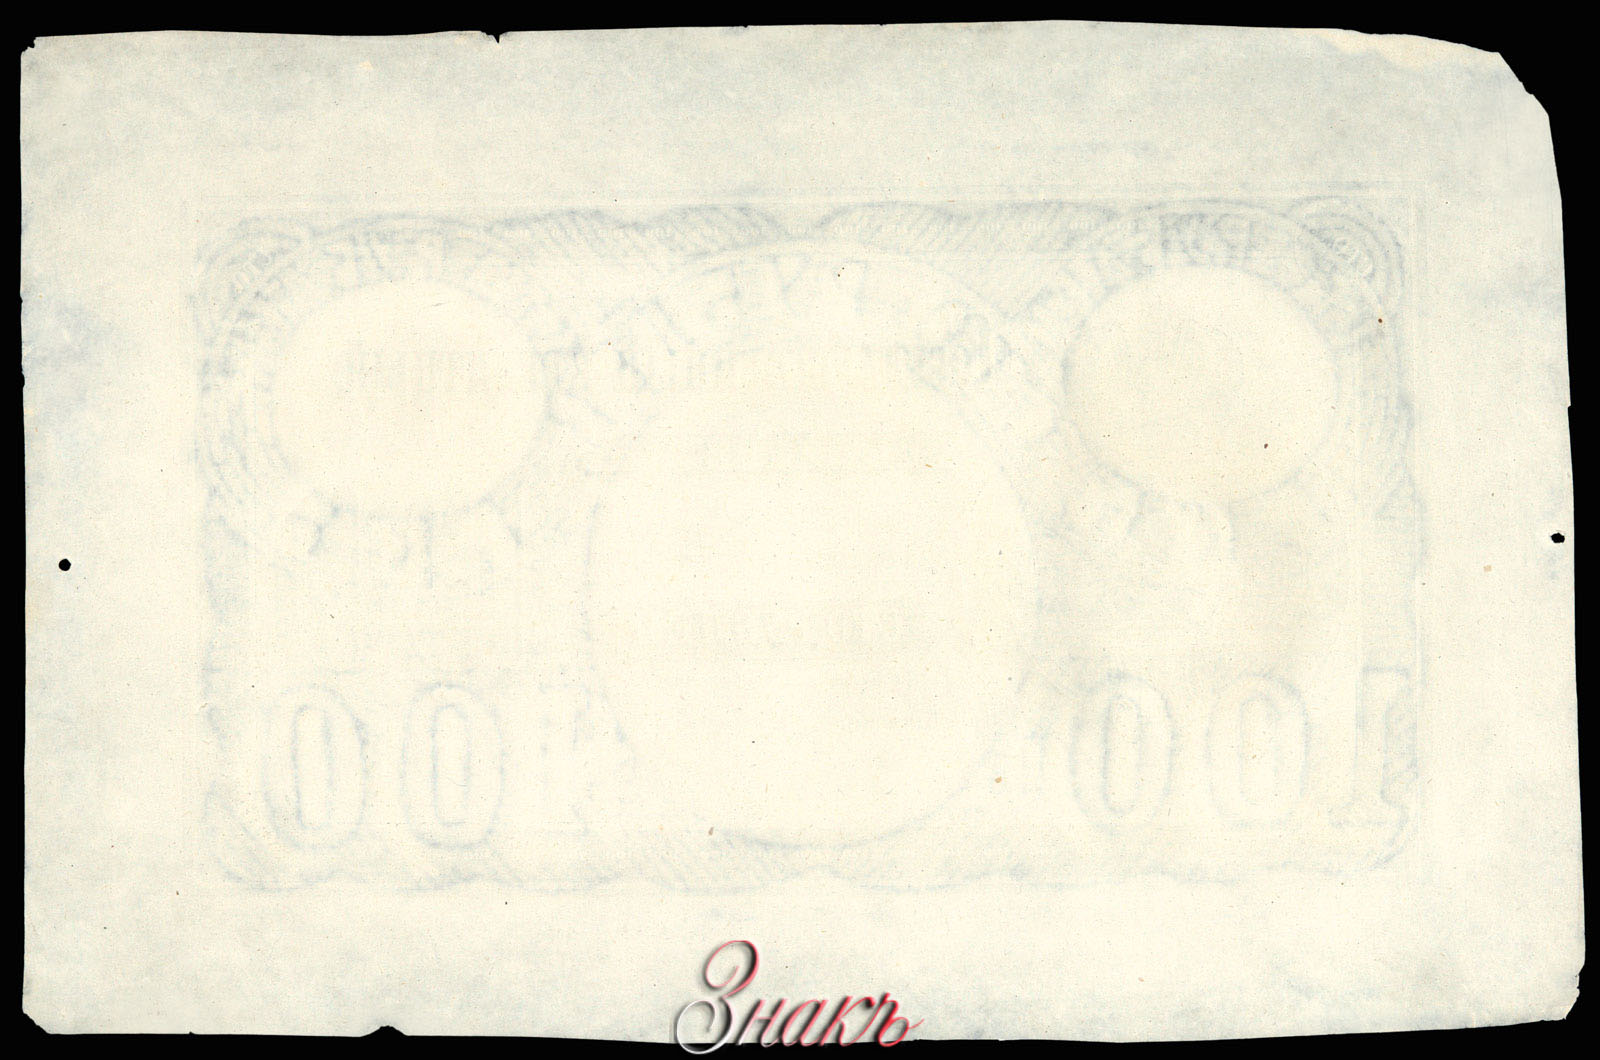 Russian Empire State Credit bank note 100 ruble 1894